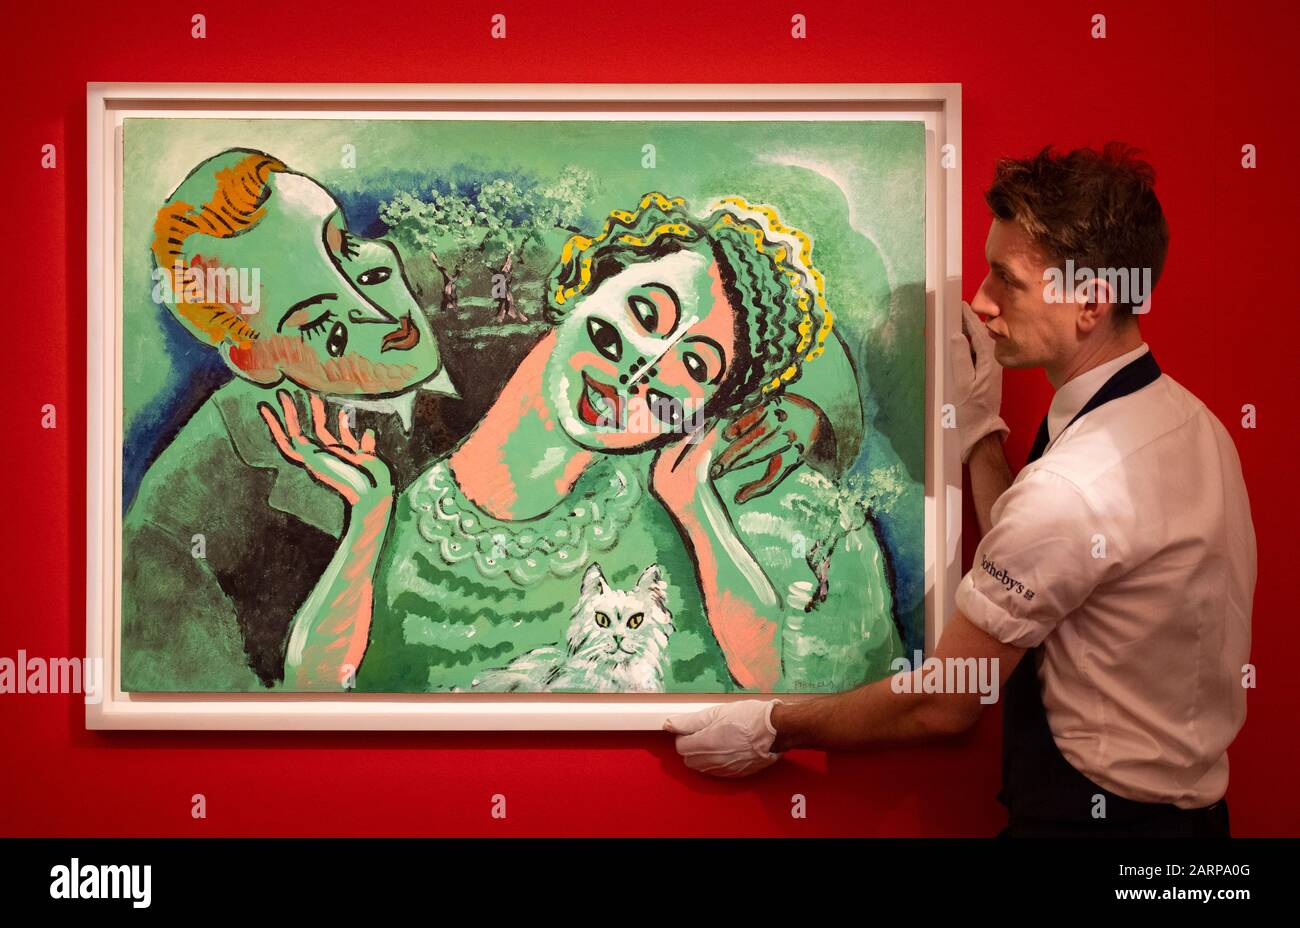 Sotheby’s, London, UK. 29th January 2020. Sotheby’s Impressionist, Modern & Surrealist Art sale preview. Rarely-seen works by Pissarro, Signac, Van Gogh, Miró, Monet, Picasso, Léger, Kirchner & Chagall on view. Image: Francis Picabia. Sous Les Oliviers (Coquetterie), c. 1925-26. Estimate: £1,500,000-2,000,000. Credit: Malcolm Park/Alamy Live News. Stock Photo